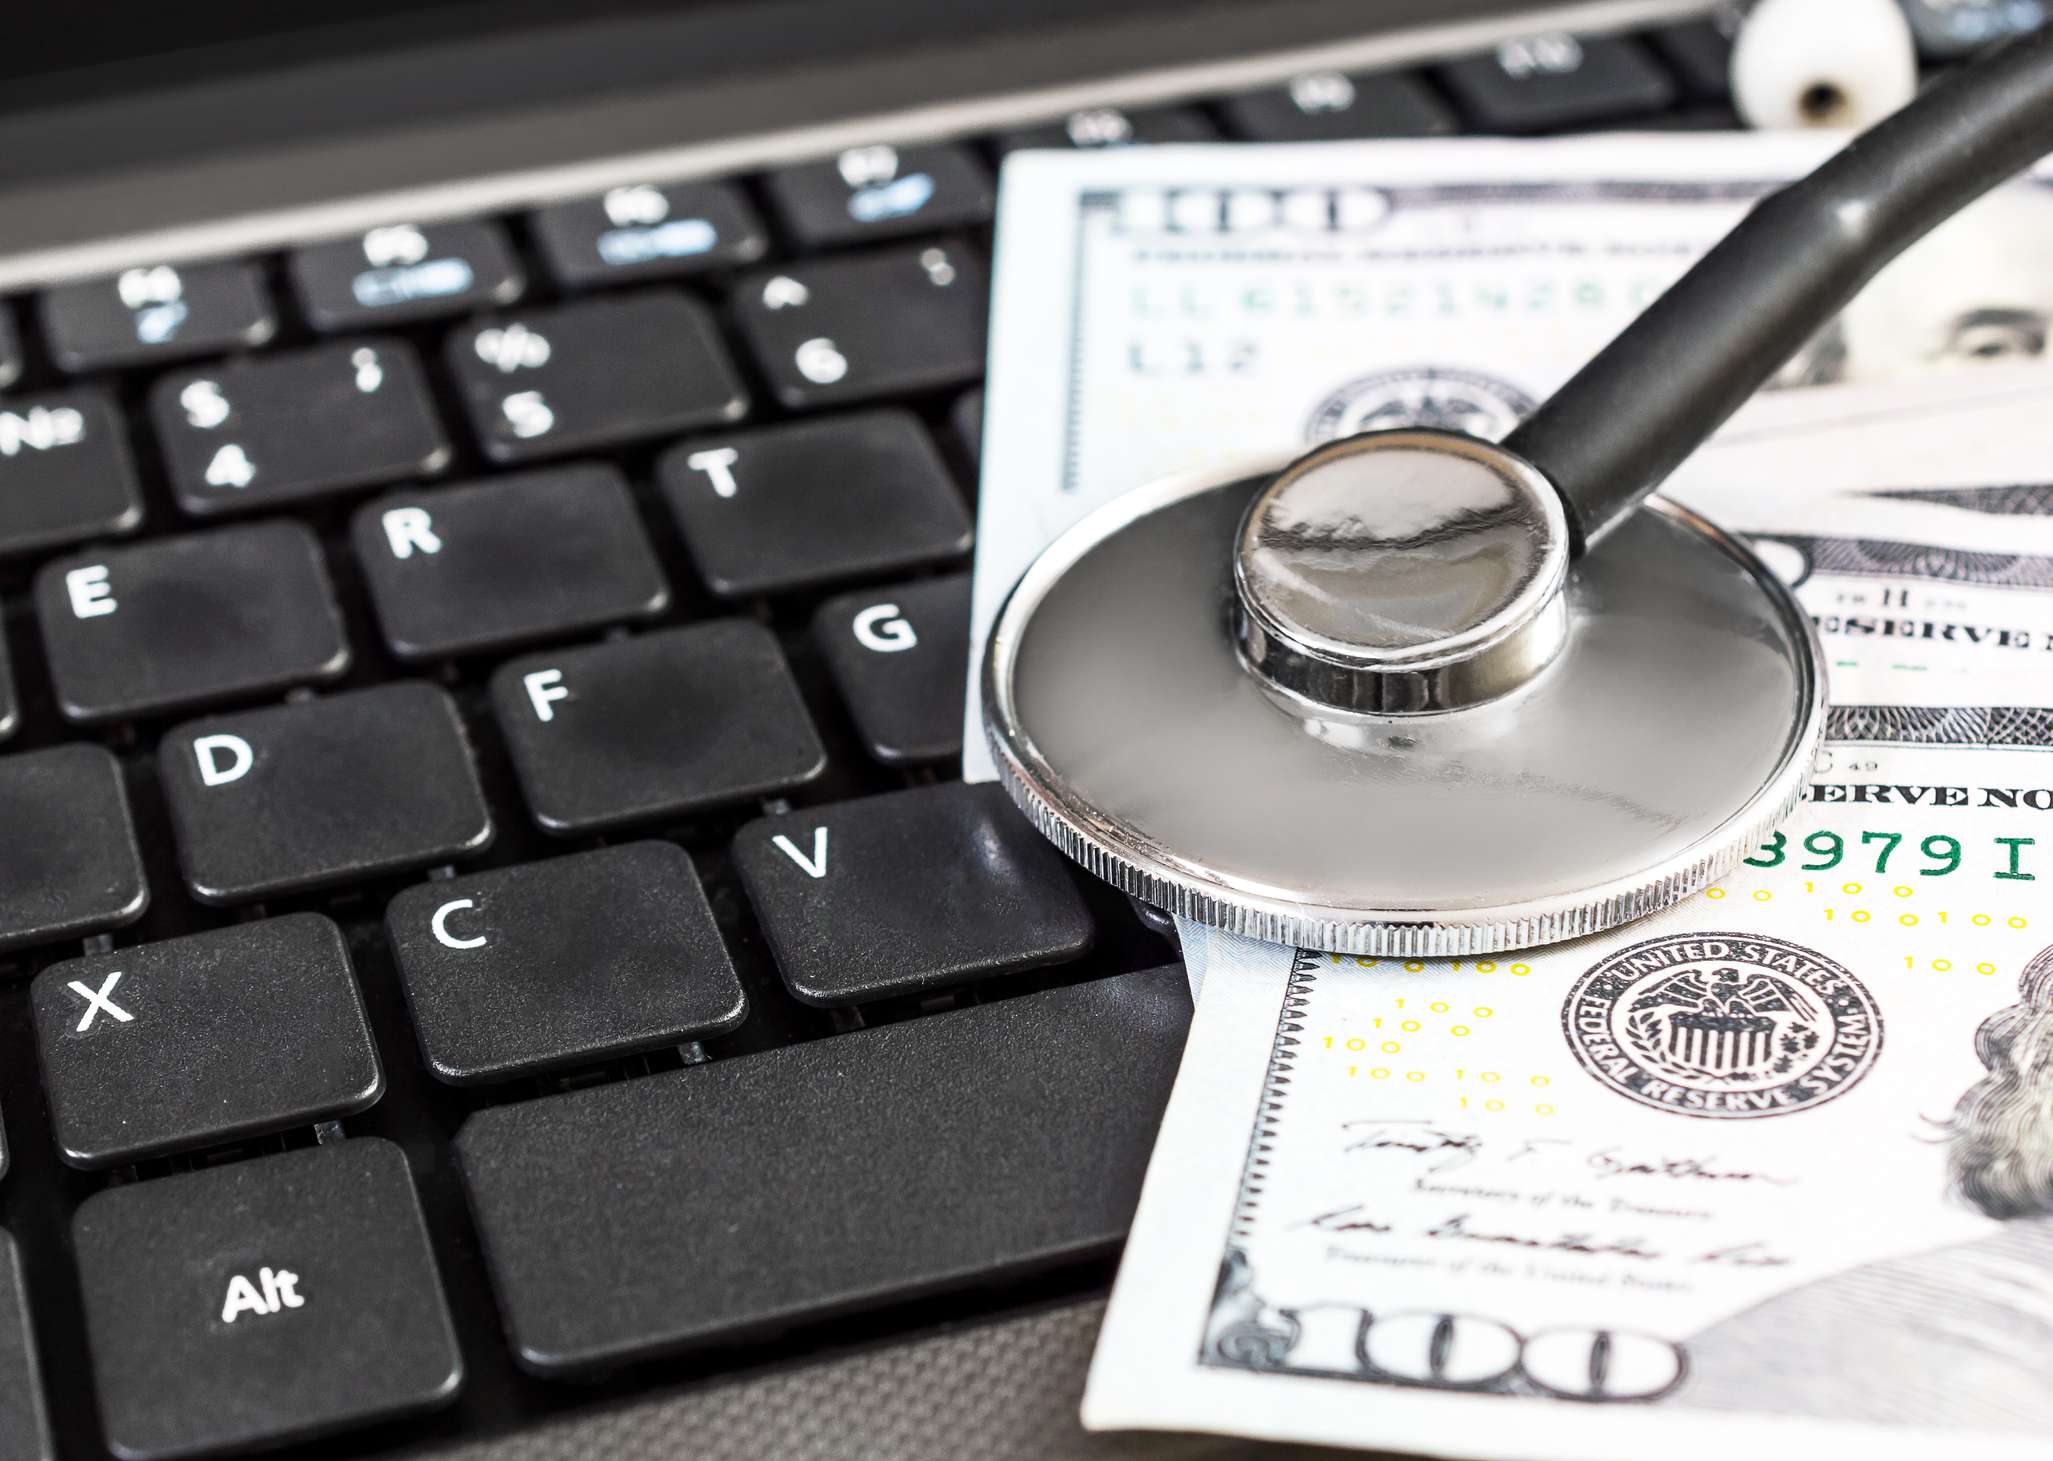 How merchant services software can improve the efficiency of healthcare payment systems